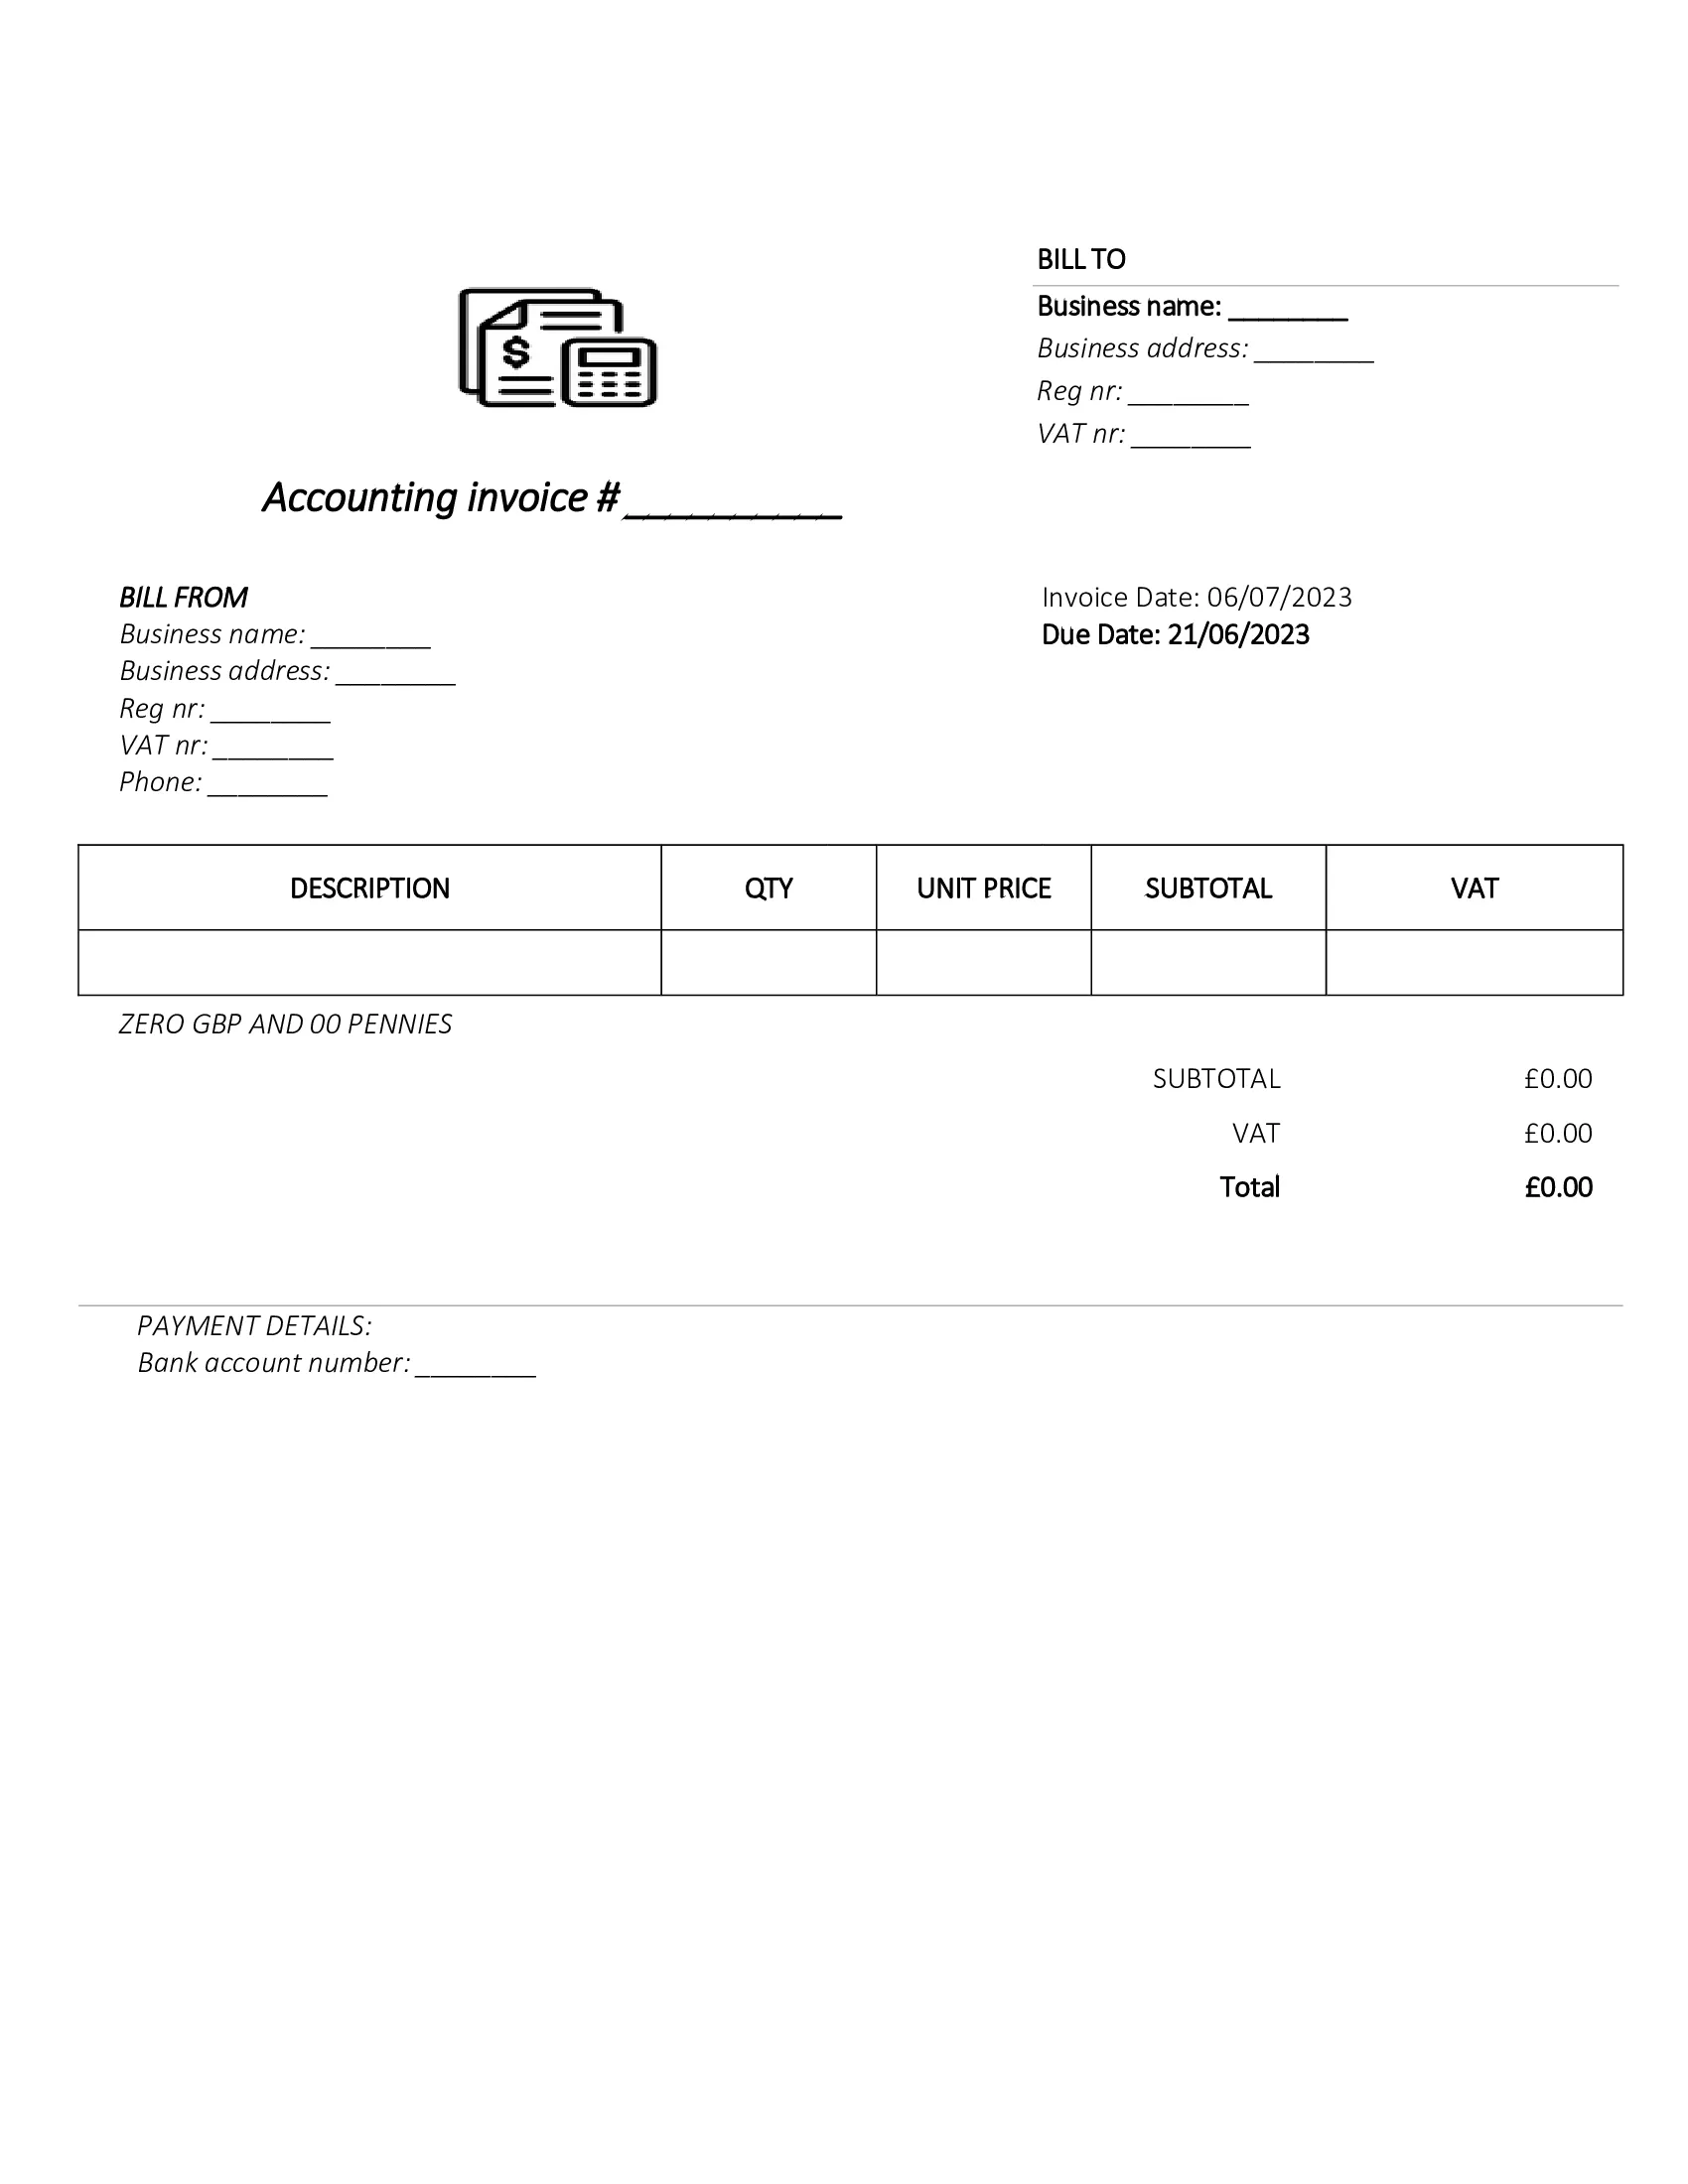 downloadable accounting invoice template UK Word / Google docs